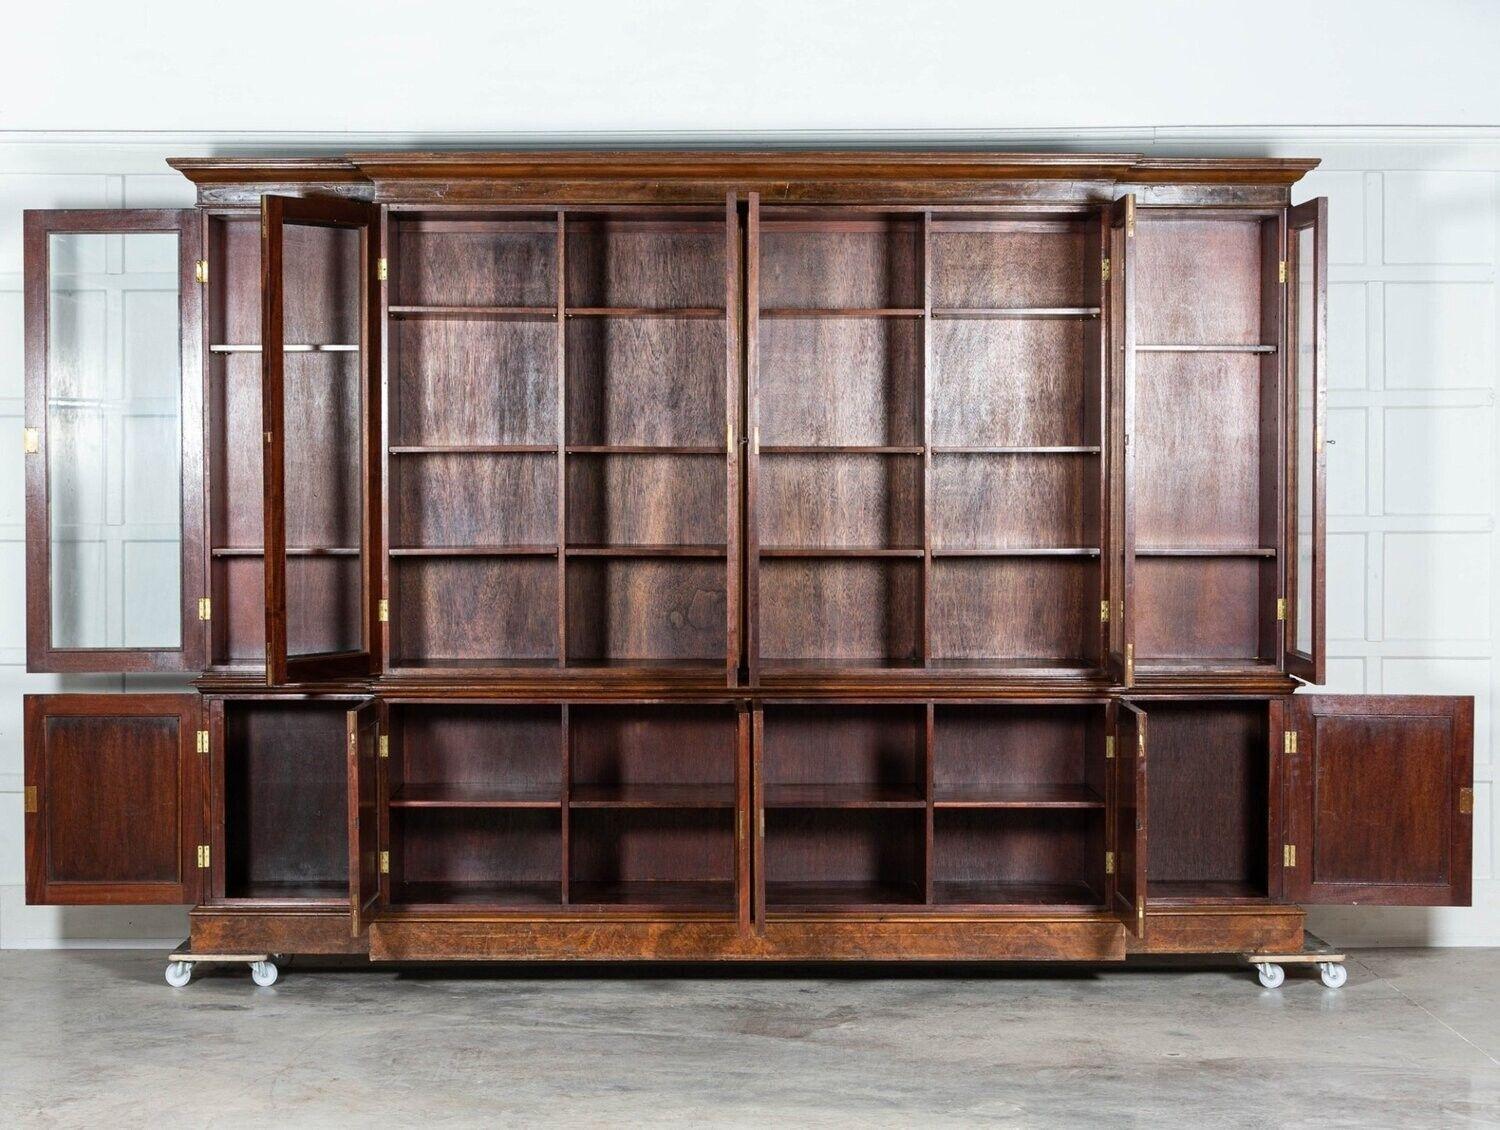 circa 1920
Monumental English Burr Walnut Breakfront Bookcase - with adjustable shelves and keys
Breaks down into smaller sections
sku 1253
(losses)
W345 x D61 x H238cm
Base W334 x D61 x H82cm
Top W345 x D55 x H156cm